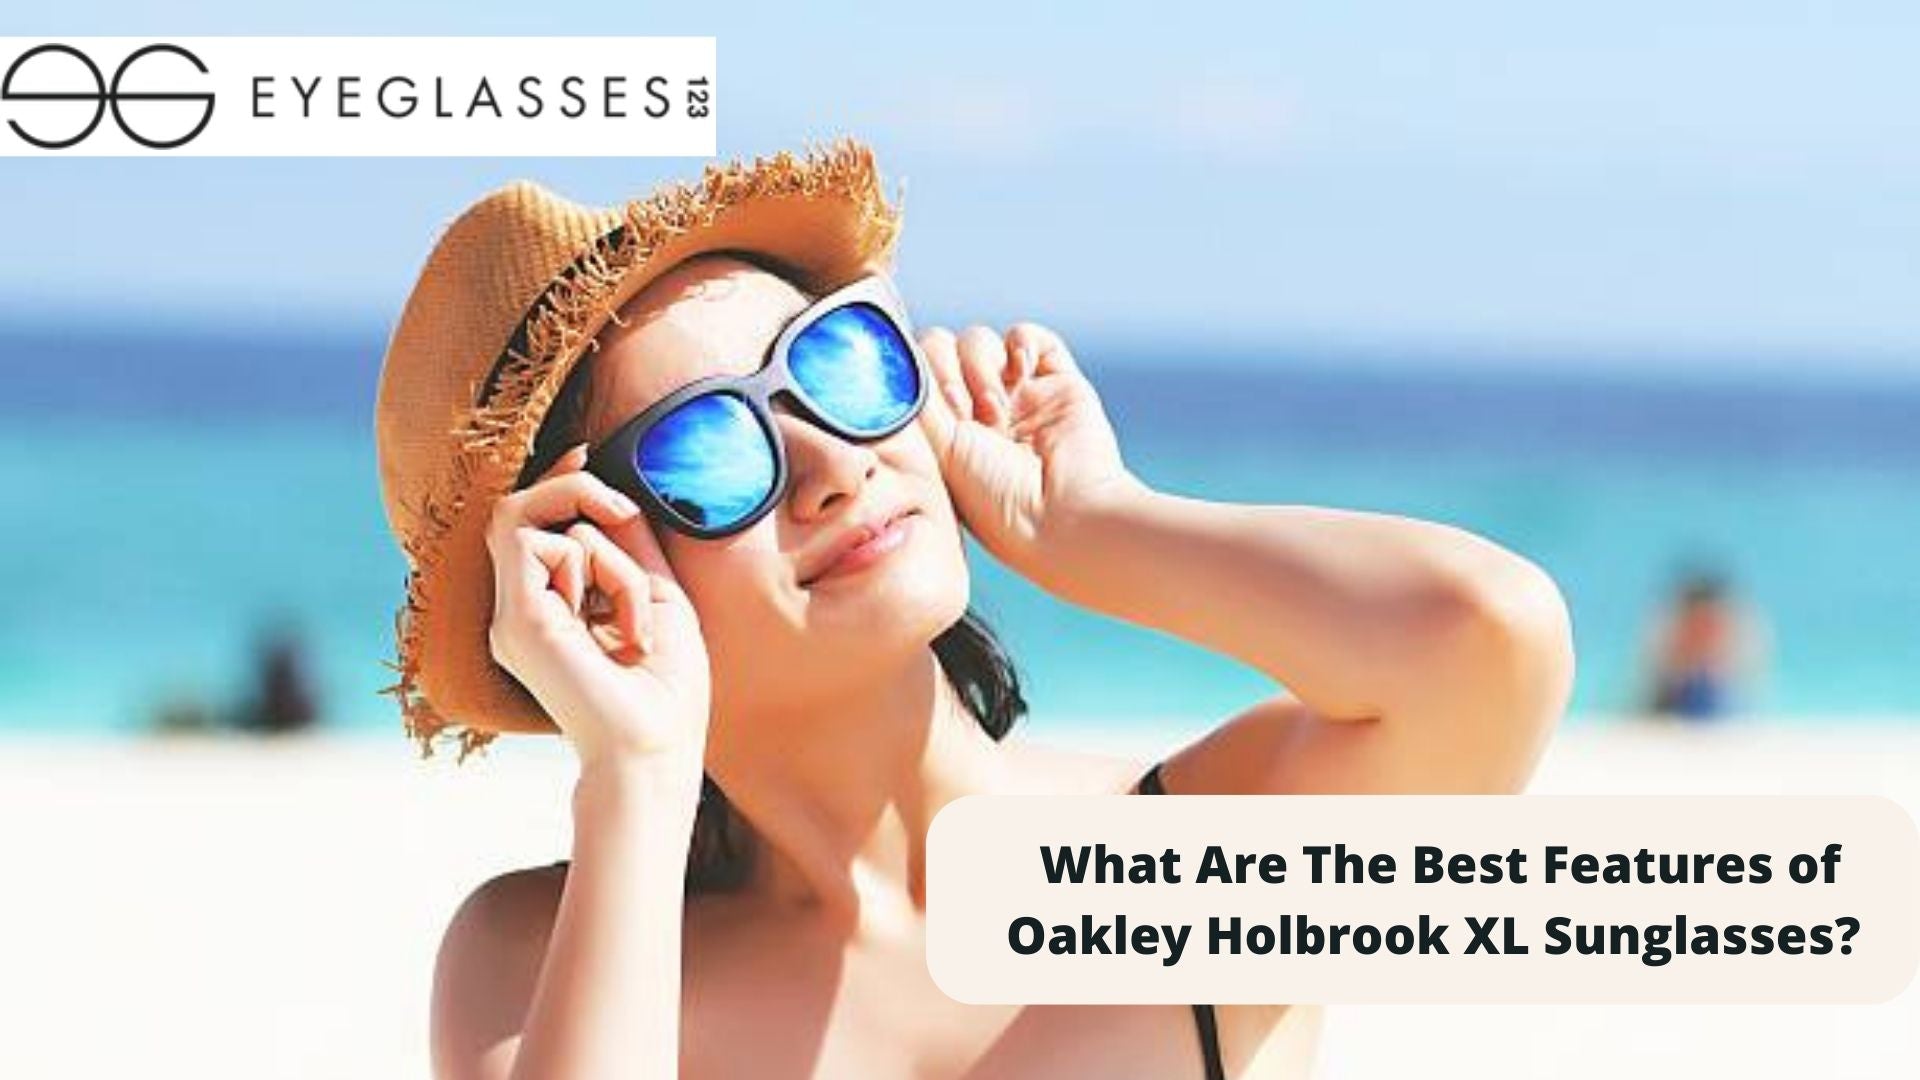 What Are The Best Features of Oakley Holbrook XL Sunglasses?